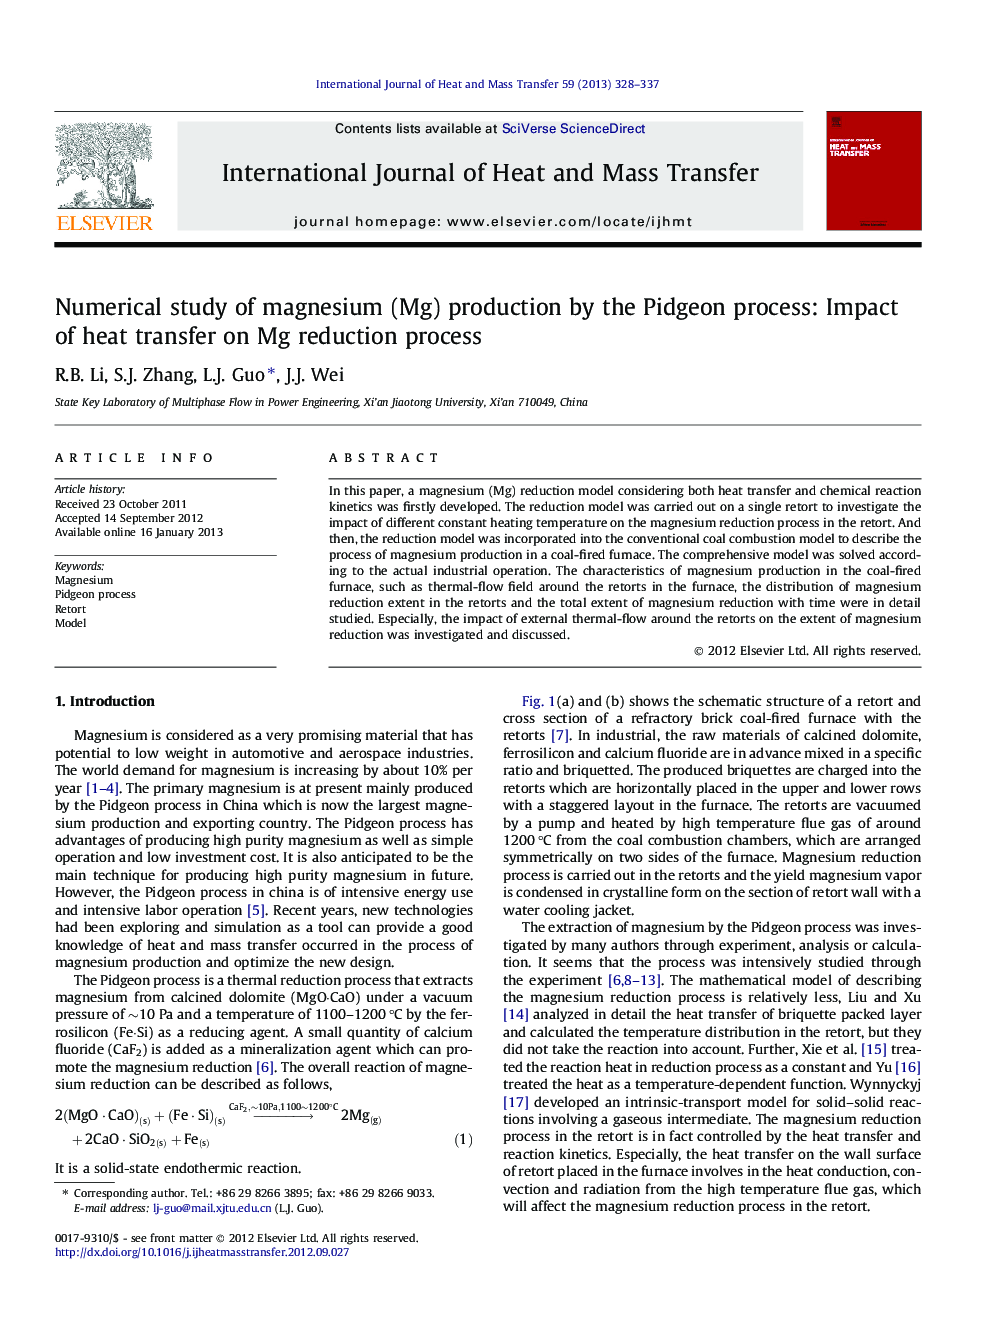 Numerical study of magnesium (Mg) production by the Pidgeon process: Impact of heat transfer on Mg reduction process